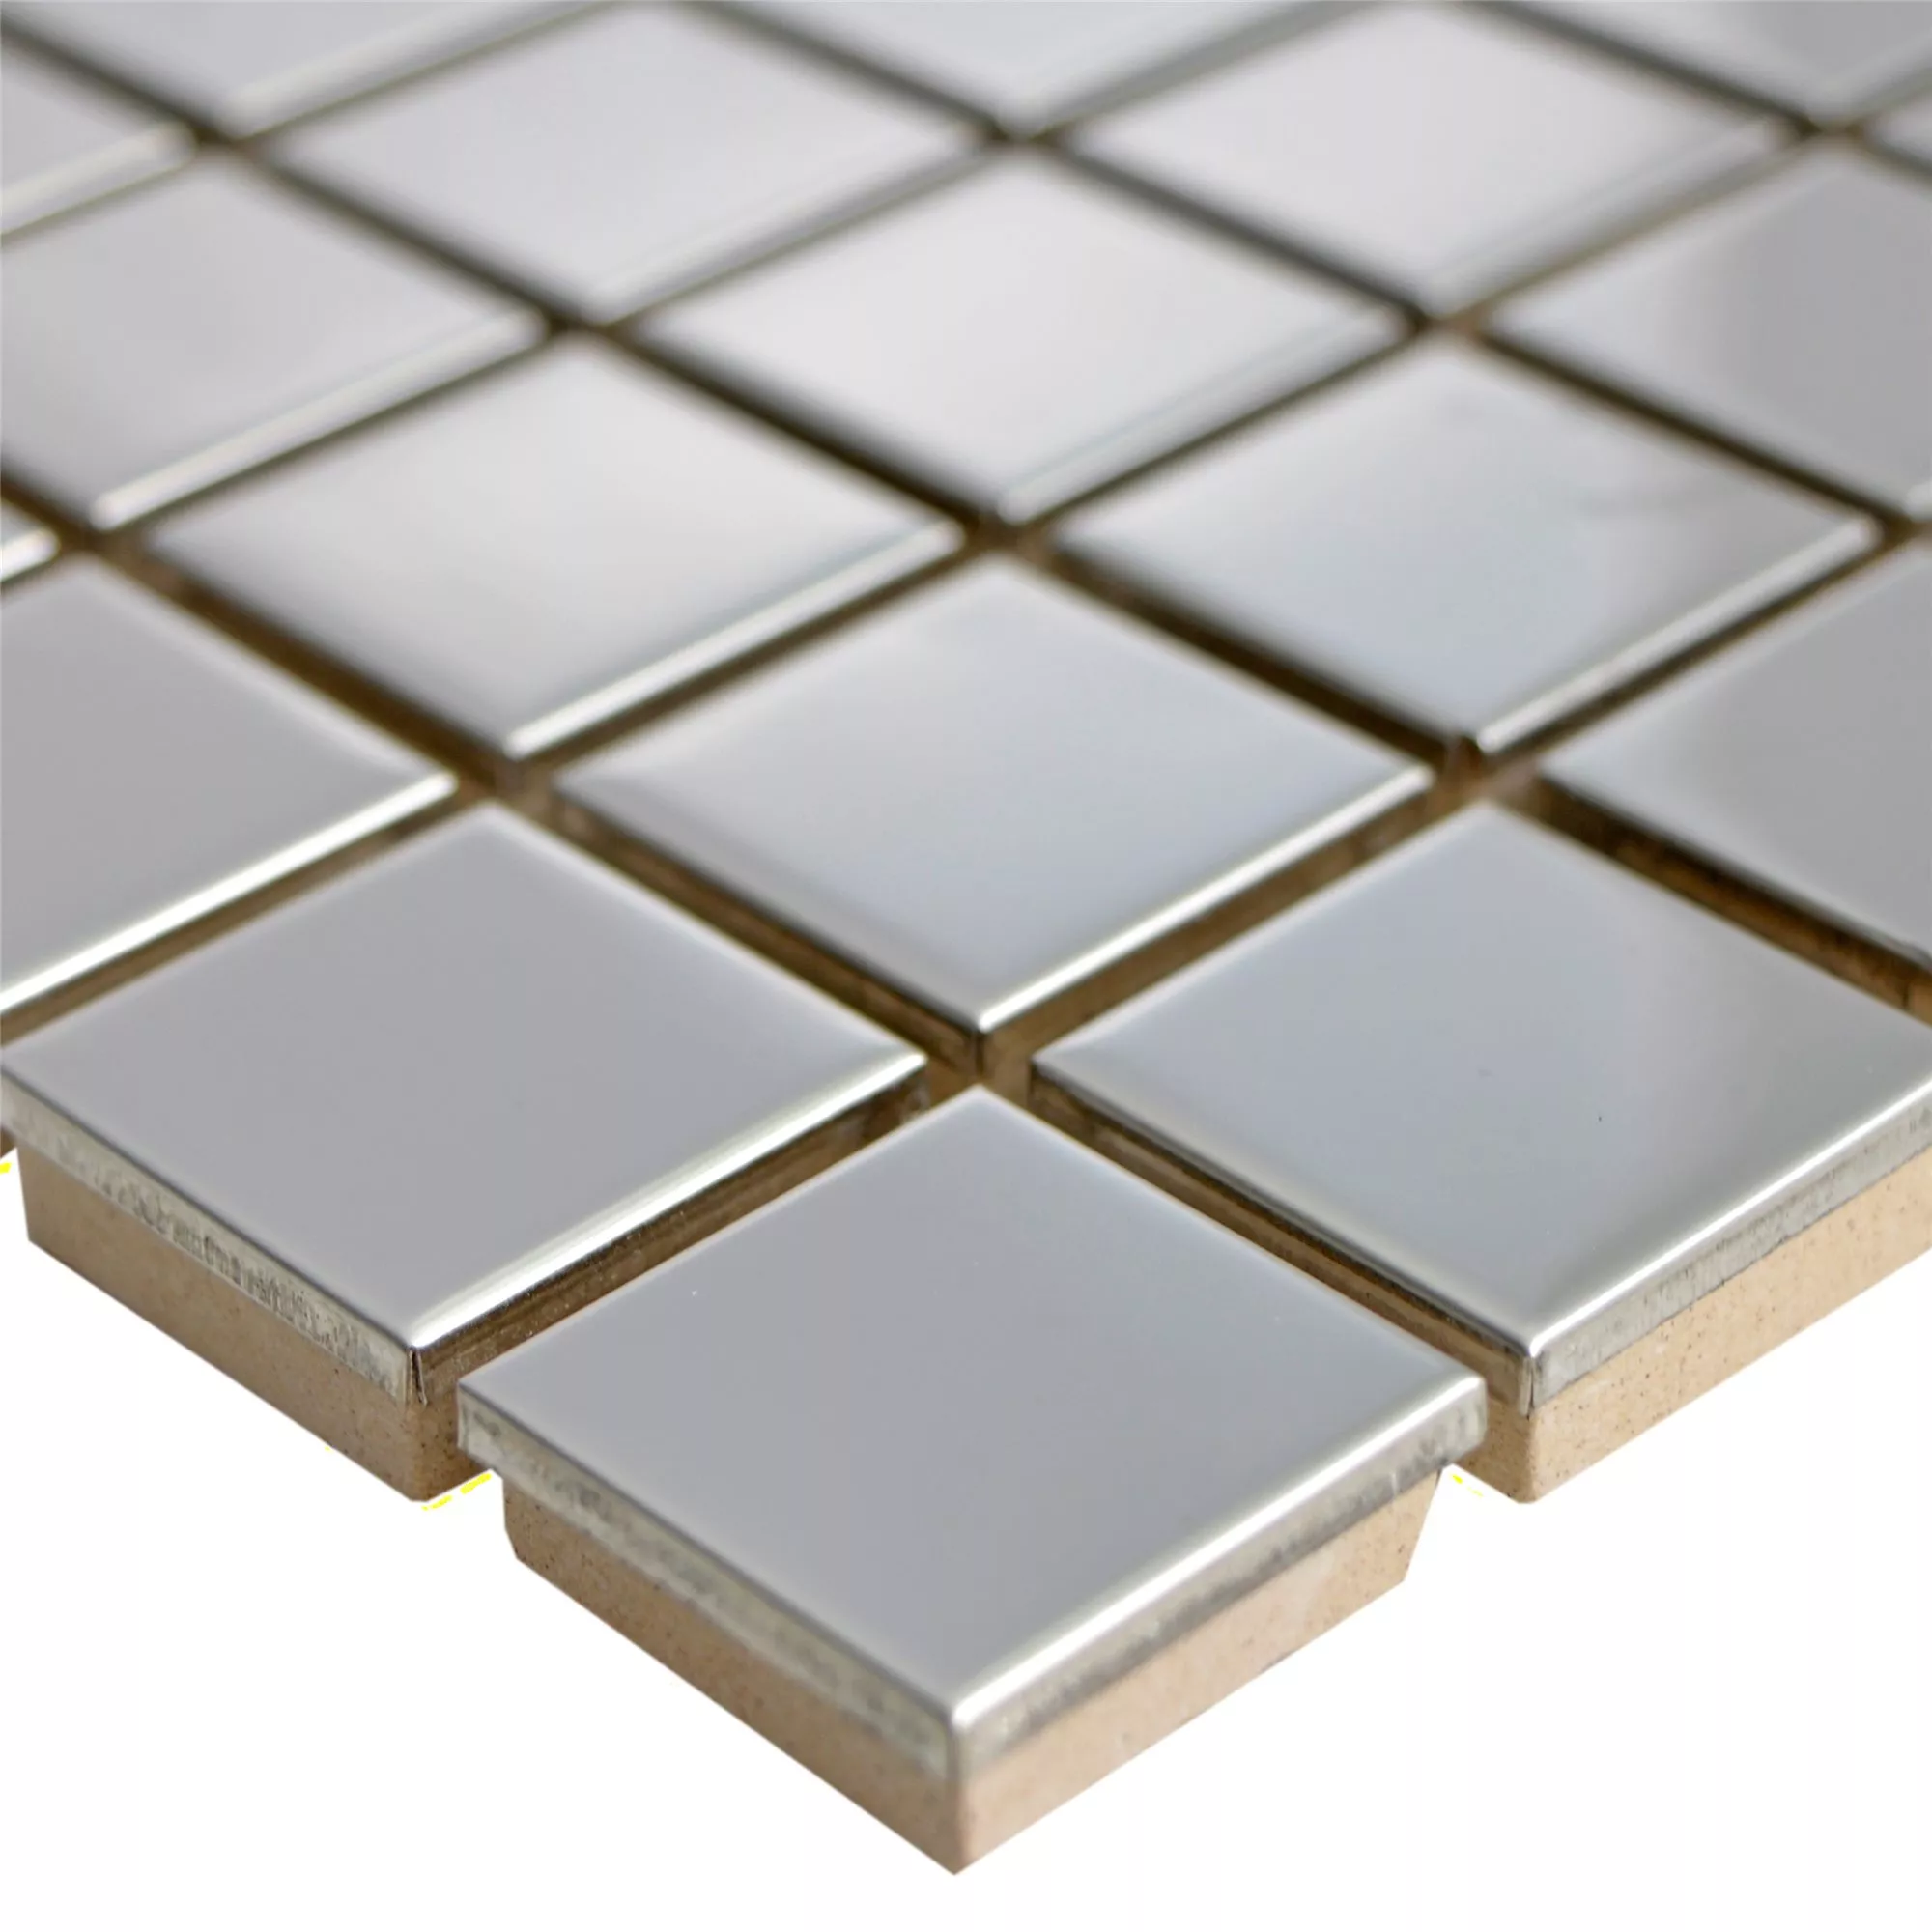 Sample Stainless Steel Mosaic Tiles Magnet Glossy Square 23